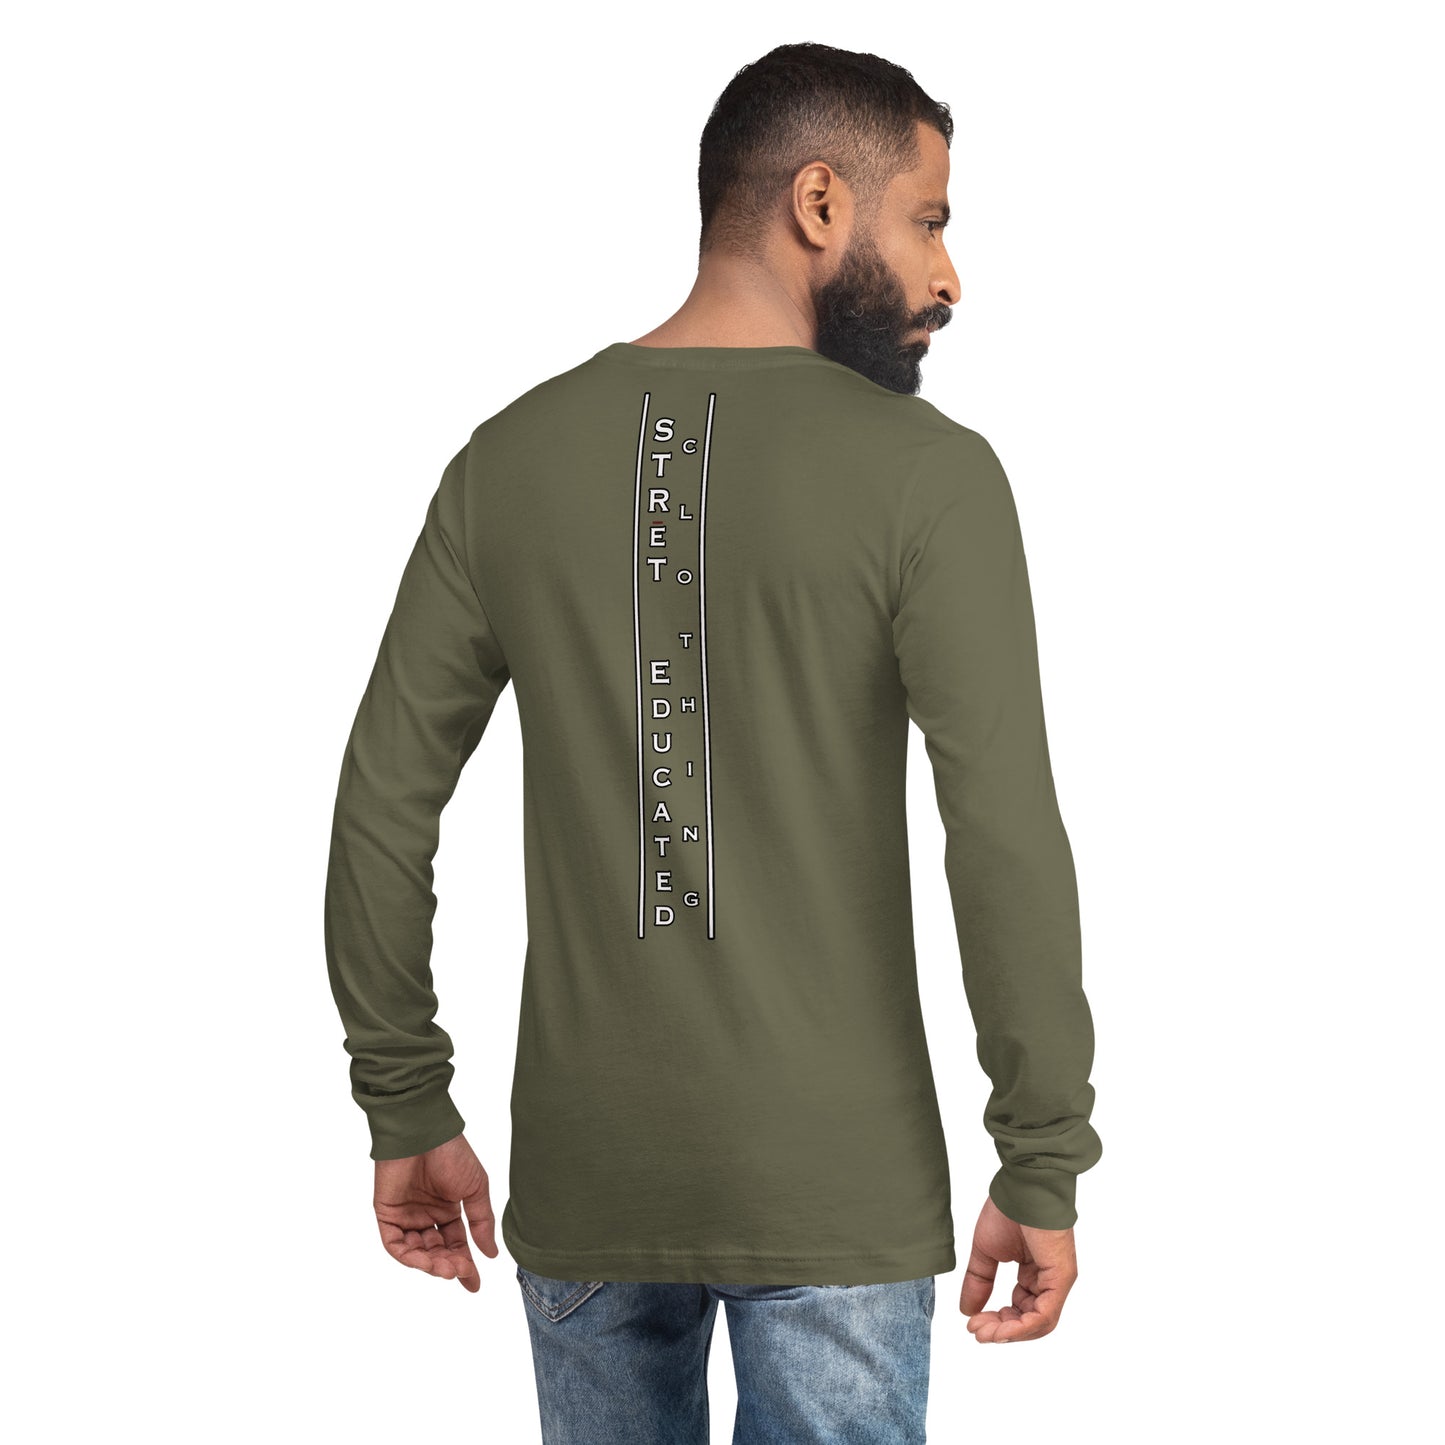 Rep Your Side Long Sleeve Shirt